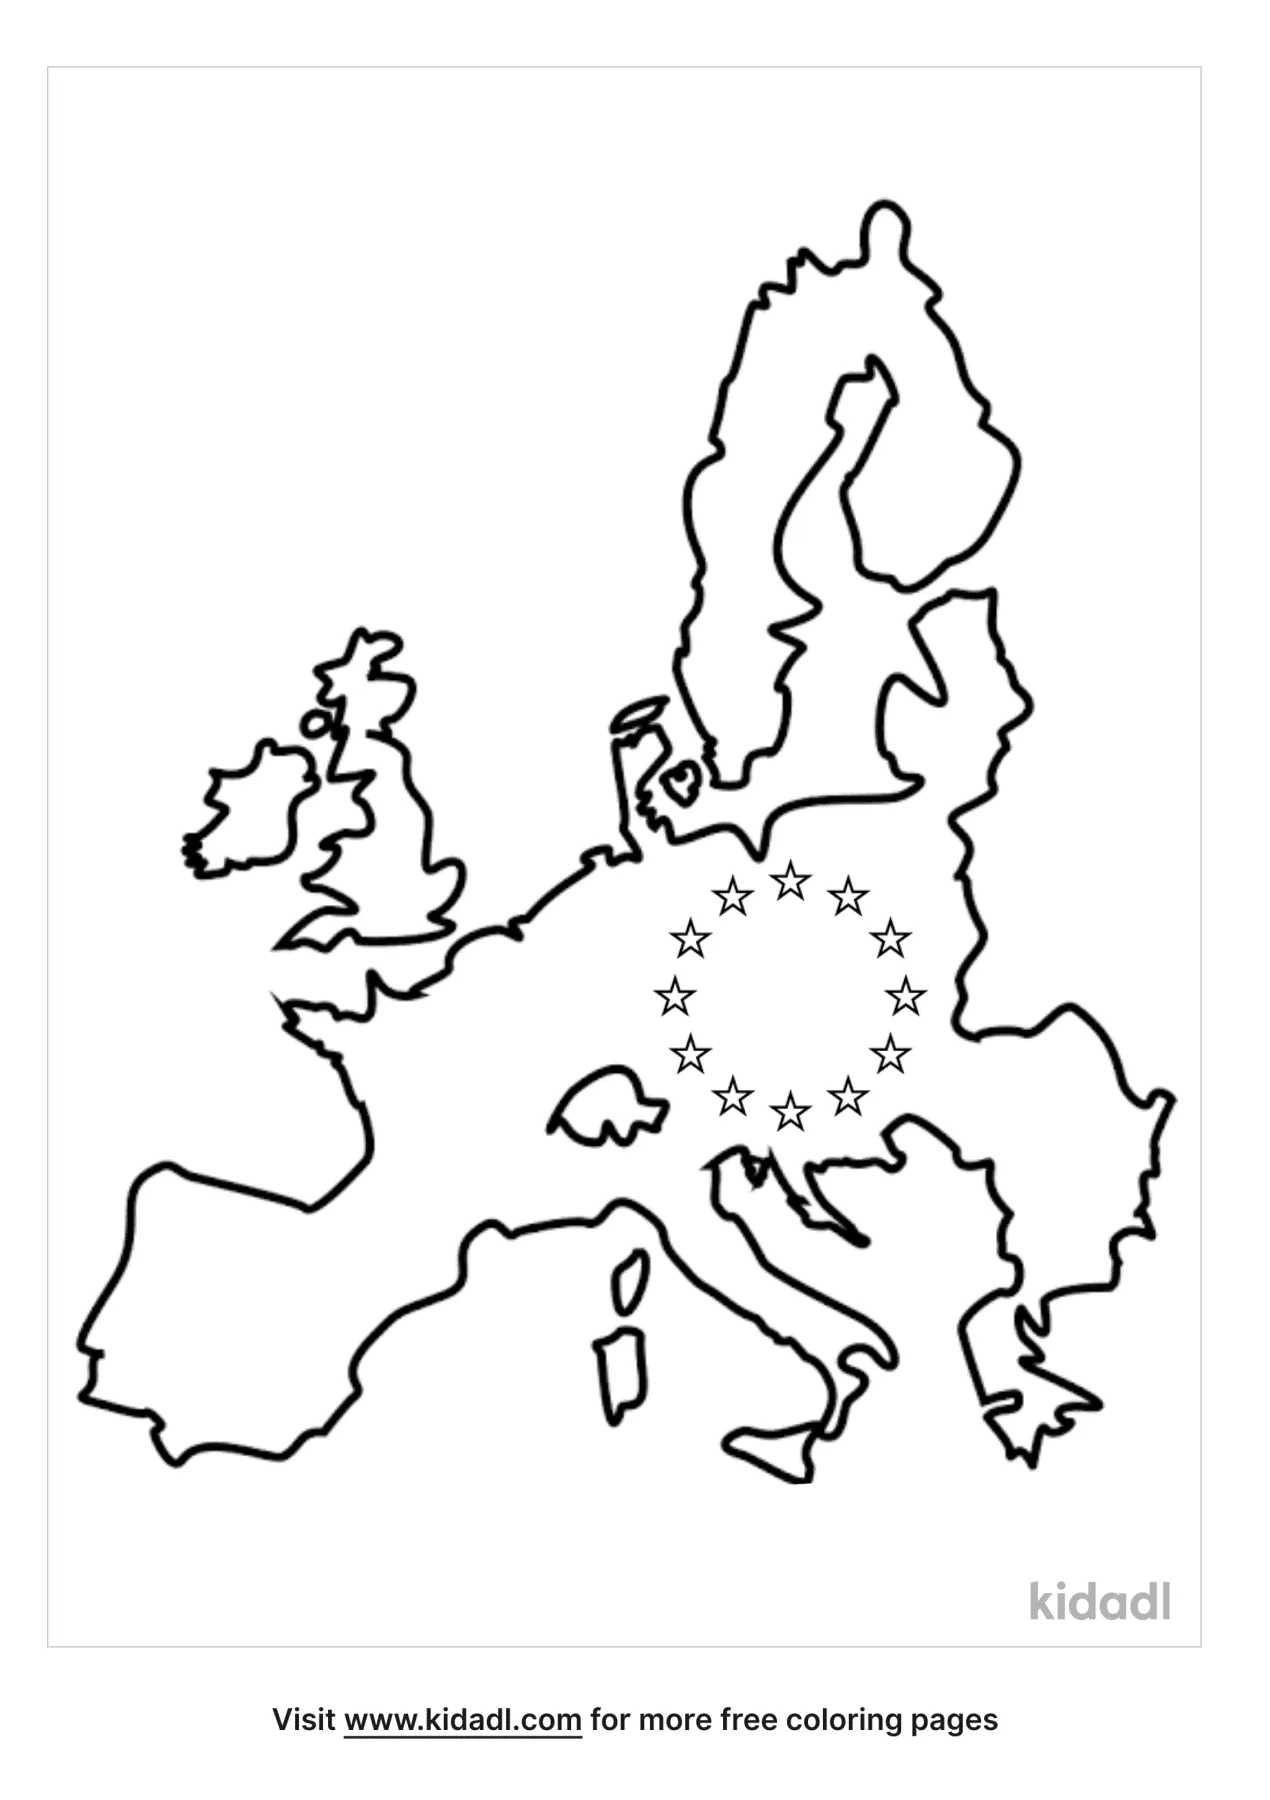 europe printable coloring pages